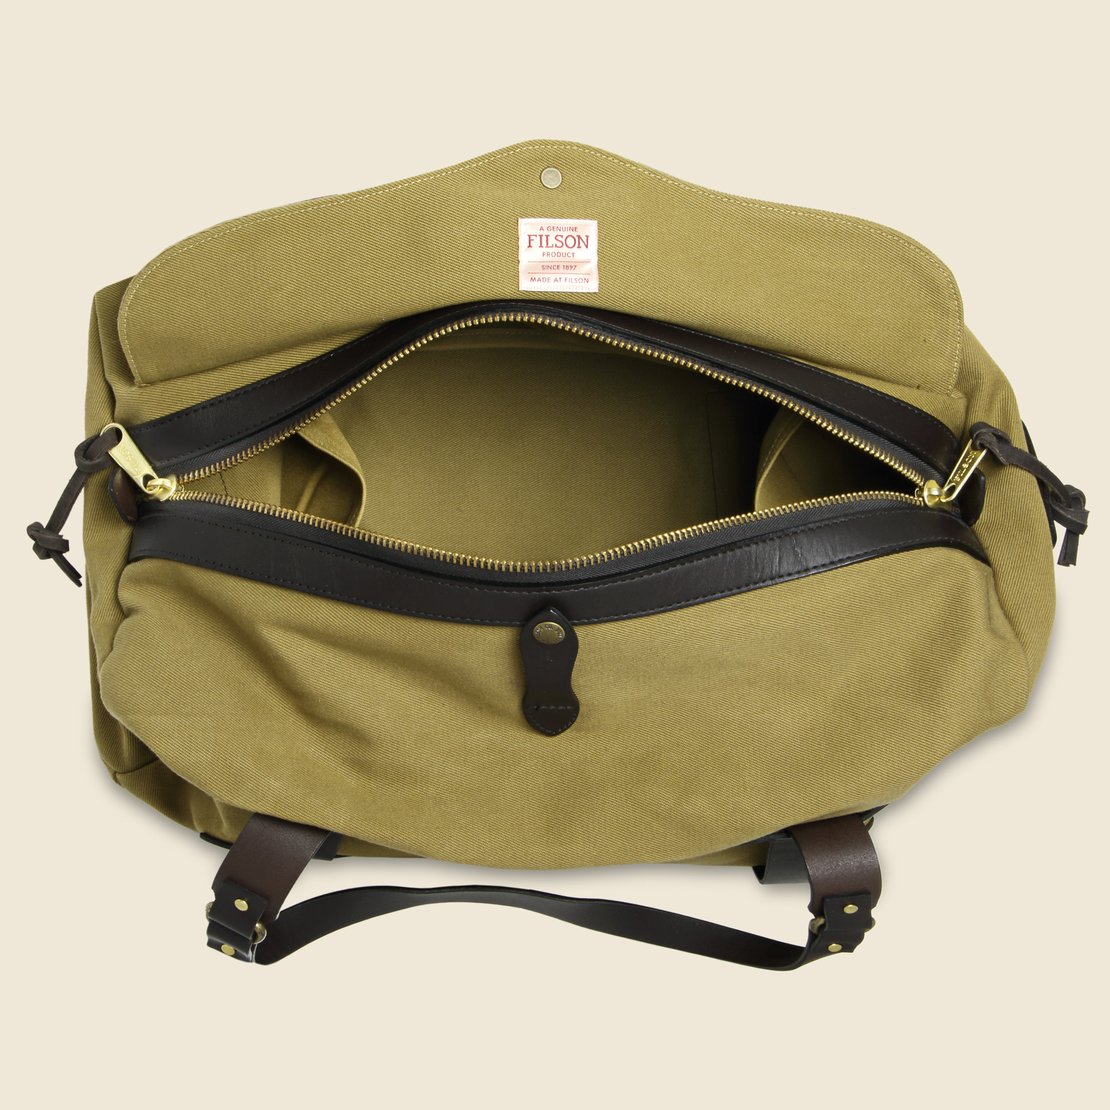 Medium Carry On Duffle Bag - Tan - Filson - STAG Provisions - Accessories - Bags / Luggage